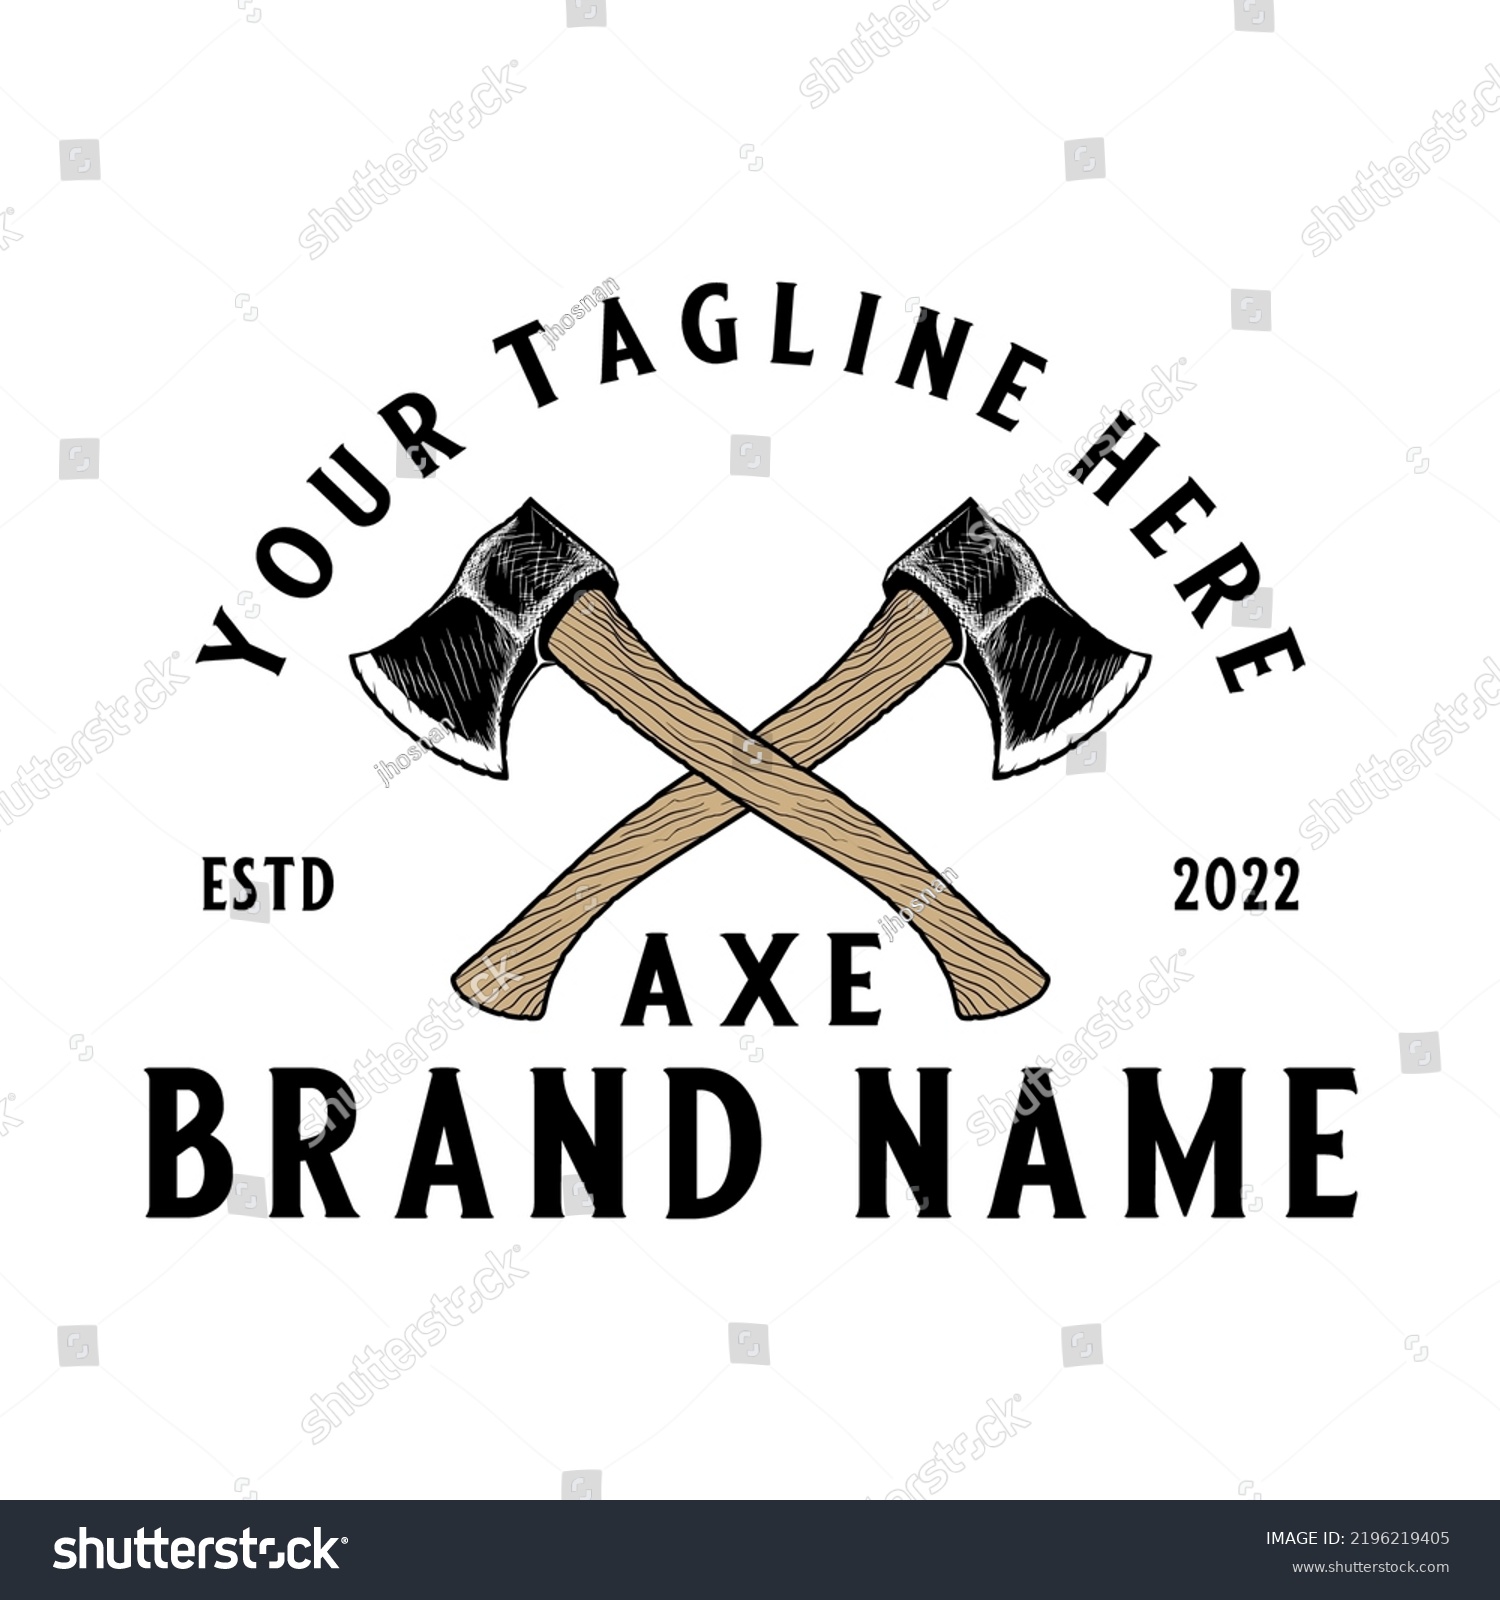 SVG of Throwing ax vector logo design. Cross ax concept, vintage, great for ax throwing clubs. svg